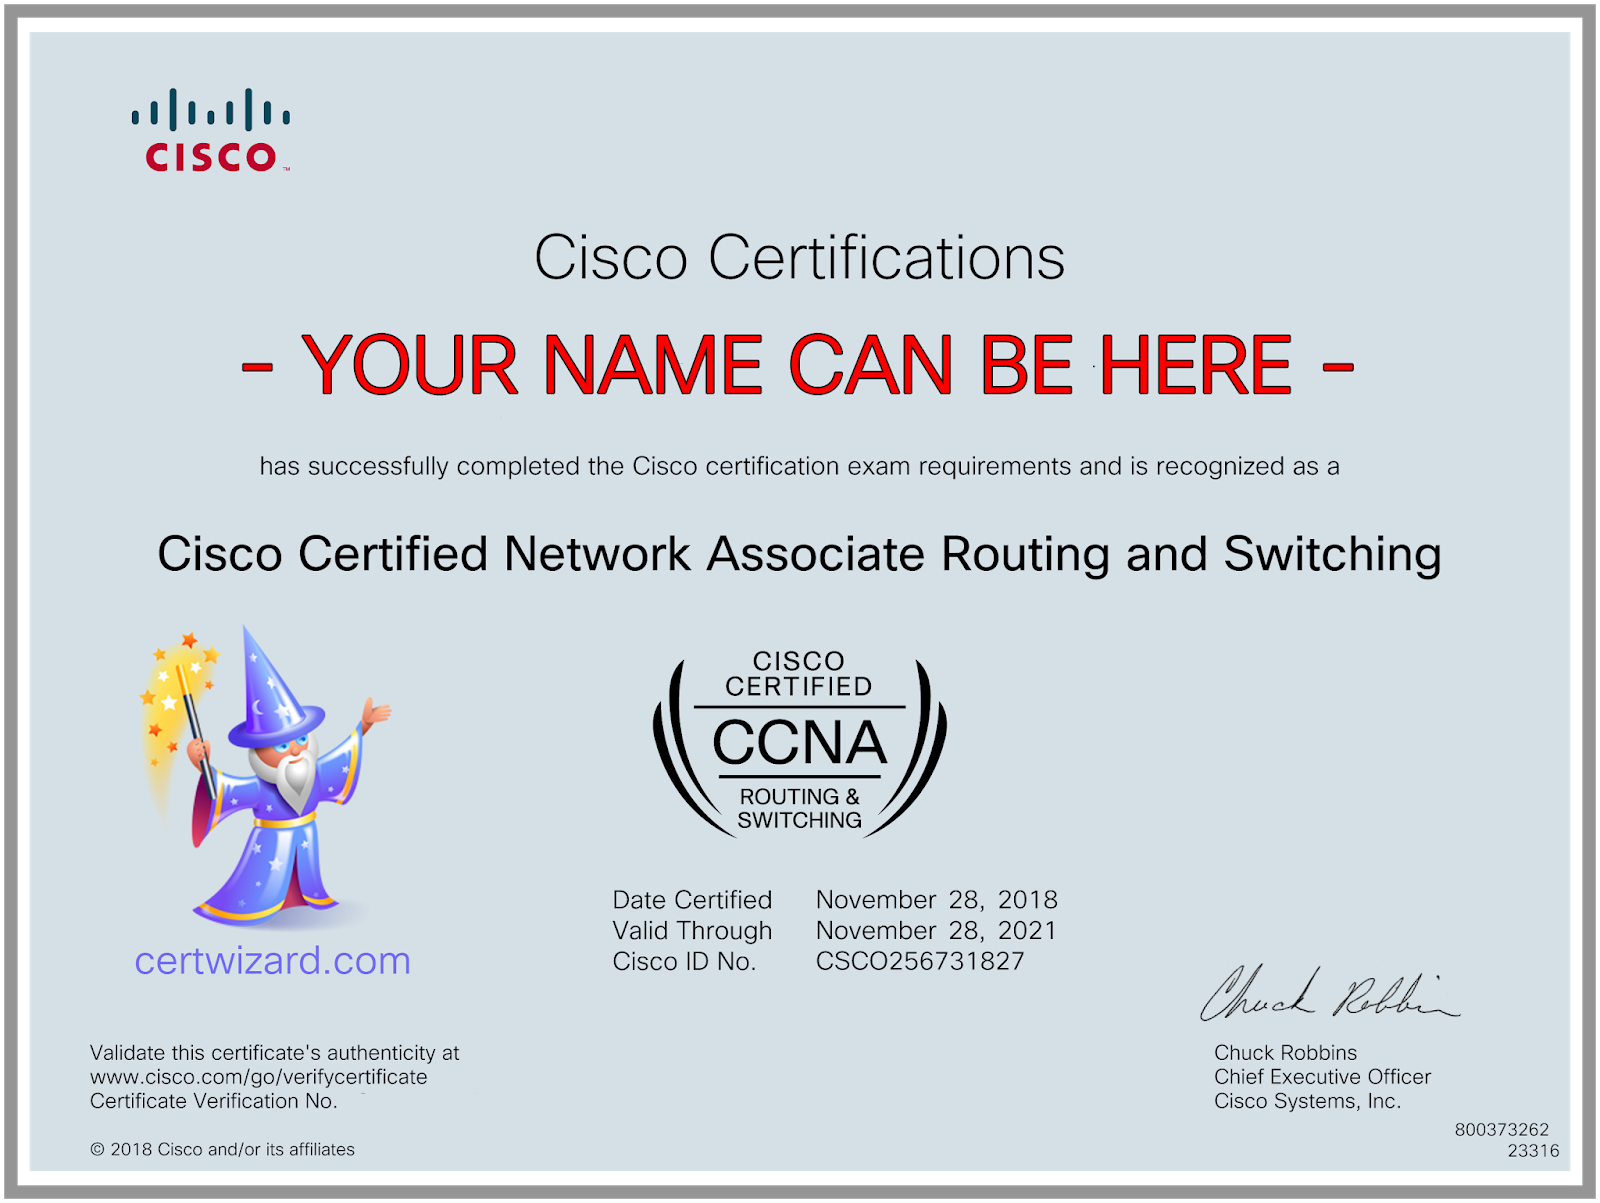 want-to-improve-your-cv-and-get-better-job-it-is-time-to-get-cisco-ccna-certification